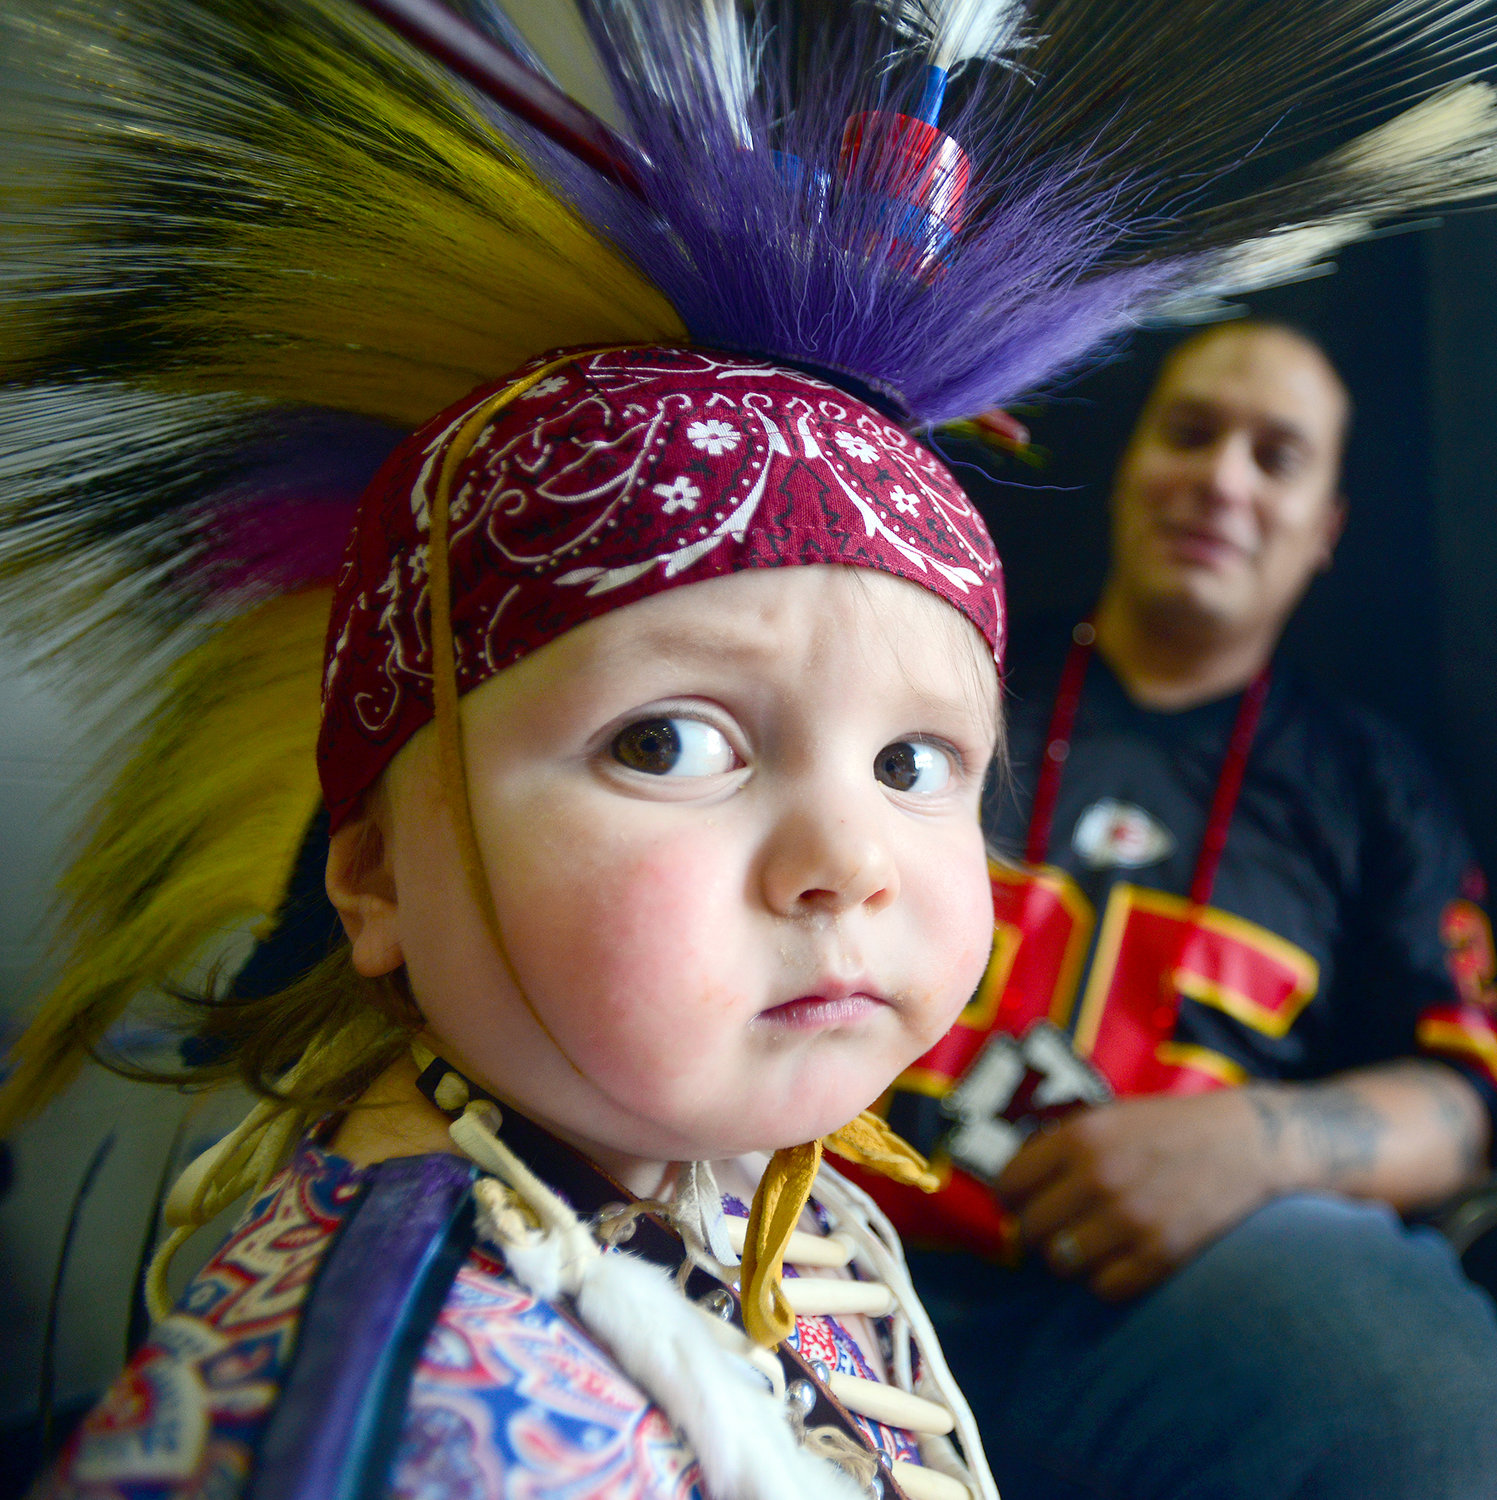 Chaytun Littleleaf, a 1 1/2 years old from Warm Springs, Ore., looks out at the dancers during a intertribal dance after his father, Owhi Littleleaf, Warm Springs, Ore., right, dressed him up for the 14th Annual Cowlitz Indian Tribe Pow-Wow at Toledo High School in Toledo, Wash., on Saturday, Sept. 21, 2013. Several hundred people attended the day-long event that featured dance contests, food vendors and raffles.